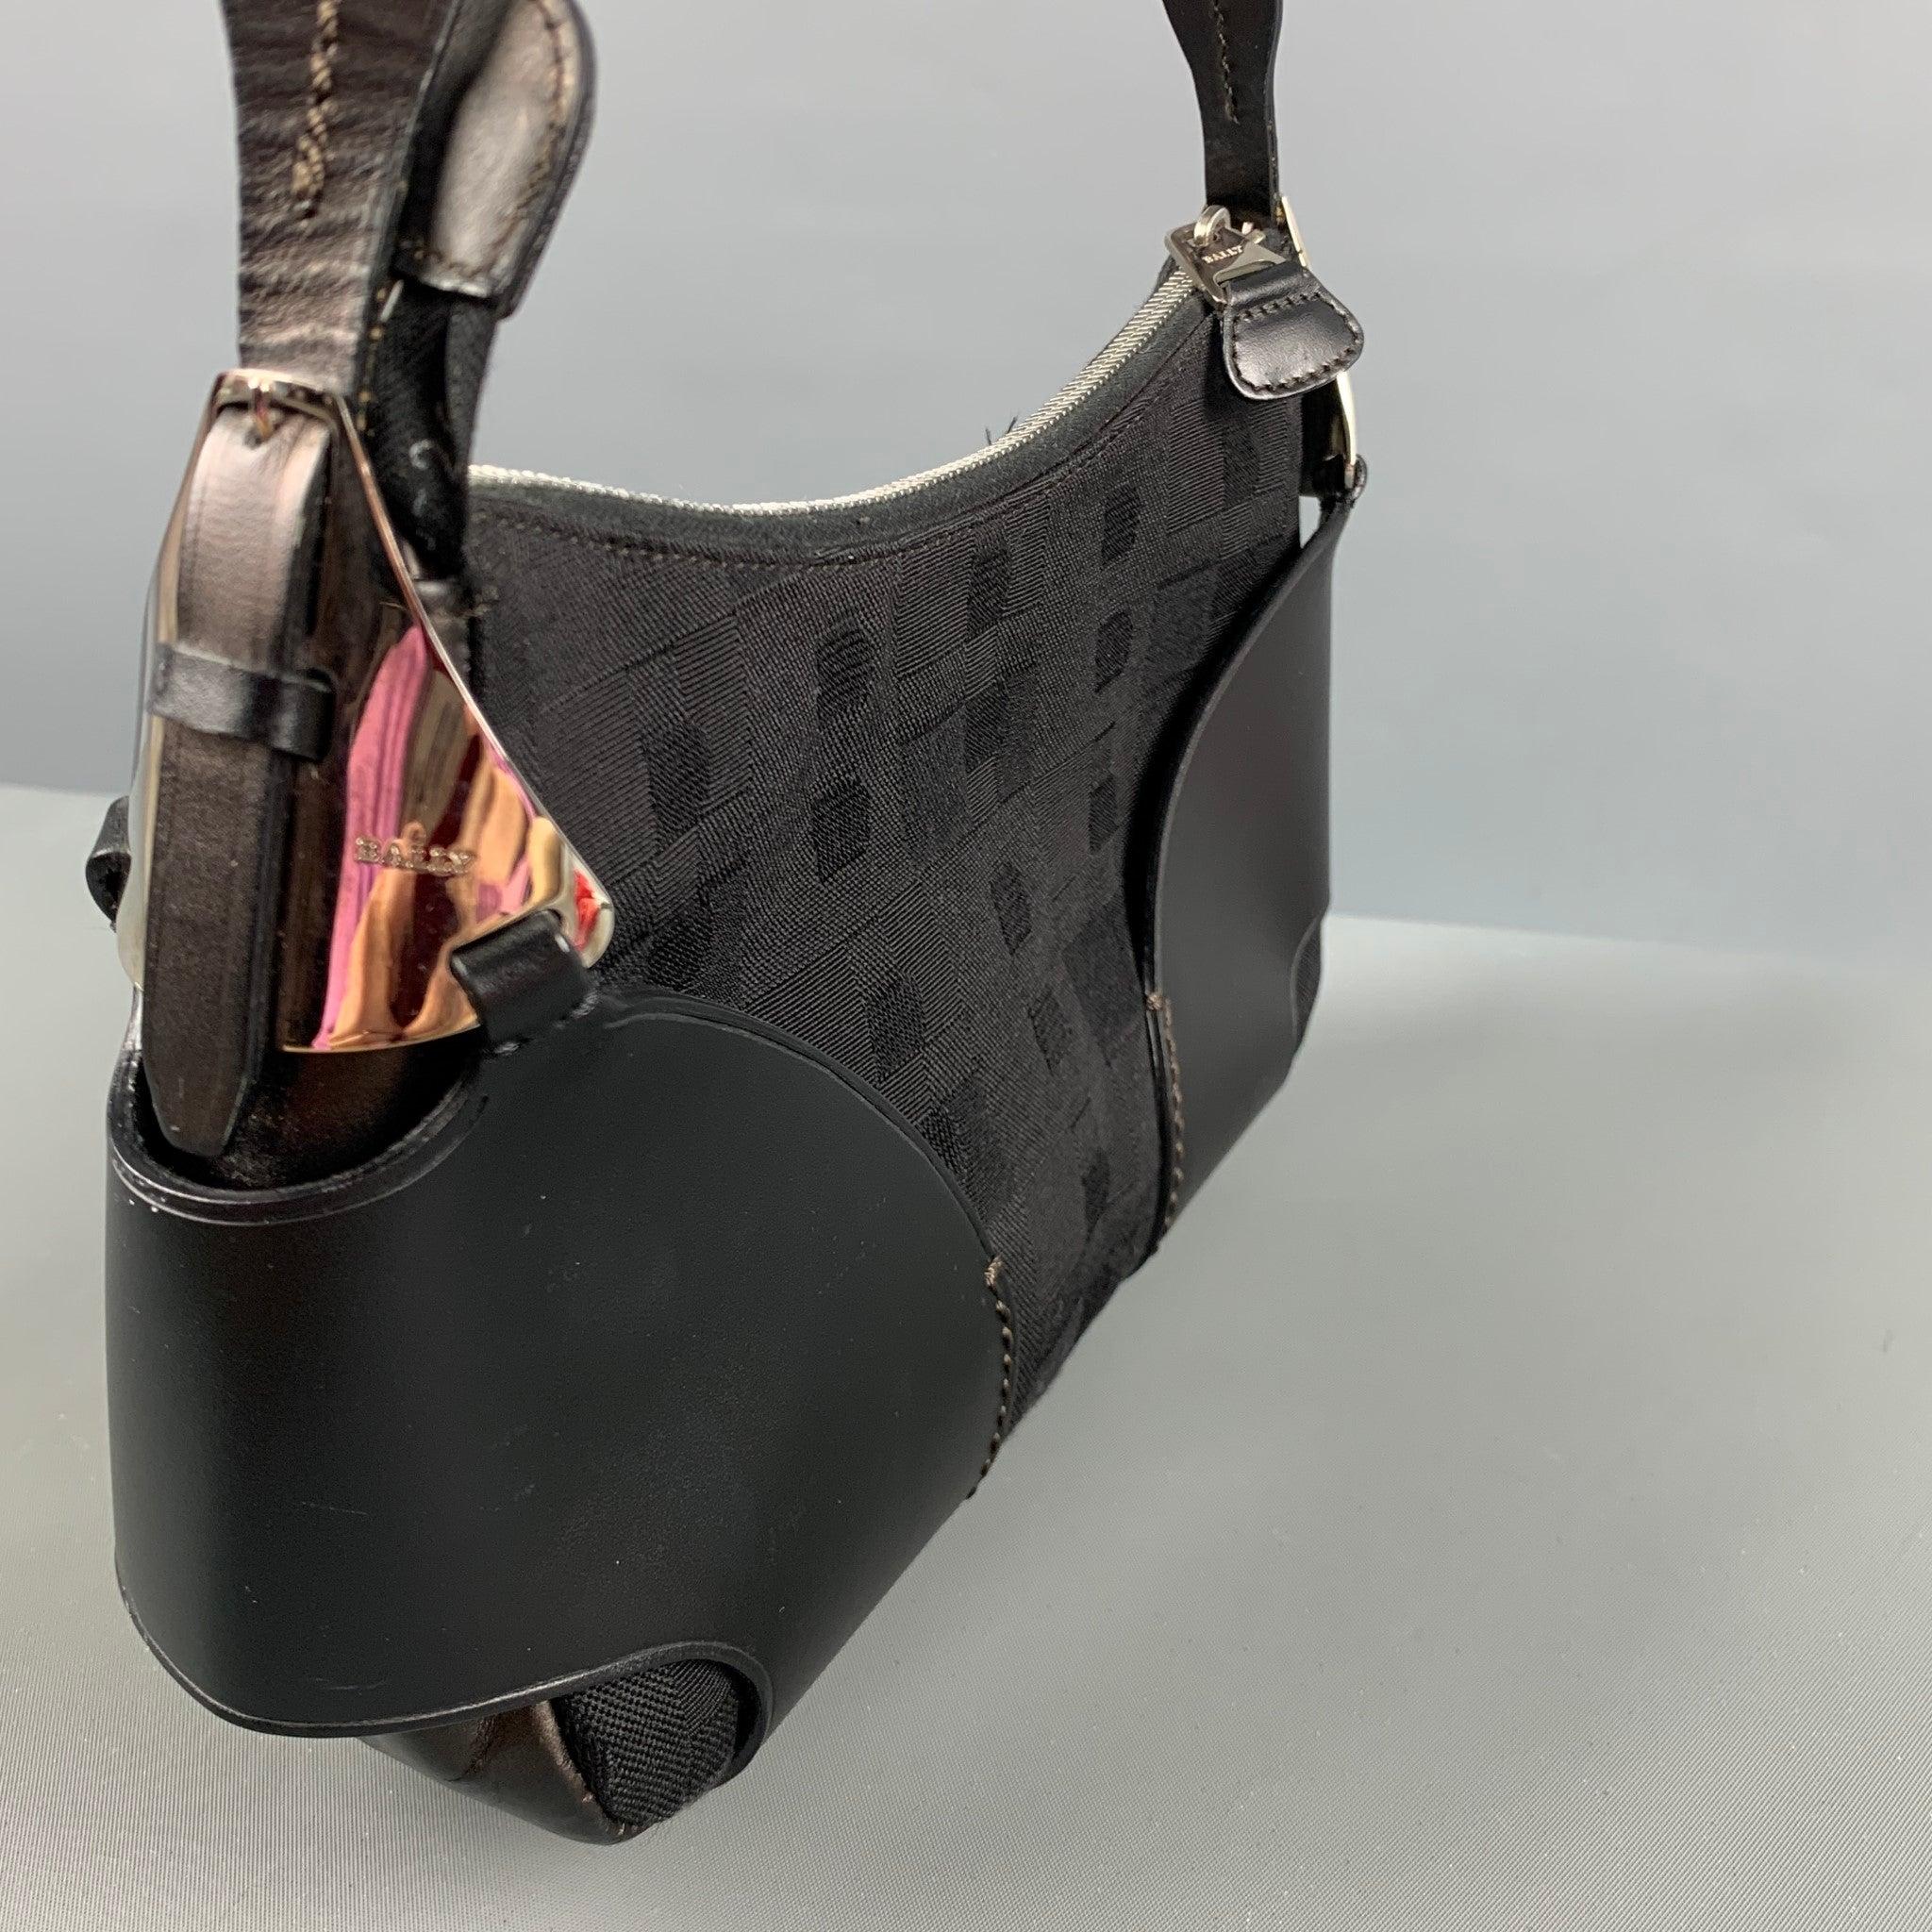 BALLY Vintage bag comes in a black monogram nylon material featuring black leather accents, inner pocket, and a zipper closure. Made in Italy.Very Good Pre-Owned Condition. Moderate signs of wear on the metal parts. 

Marked:   ACAG  

Measurements: